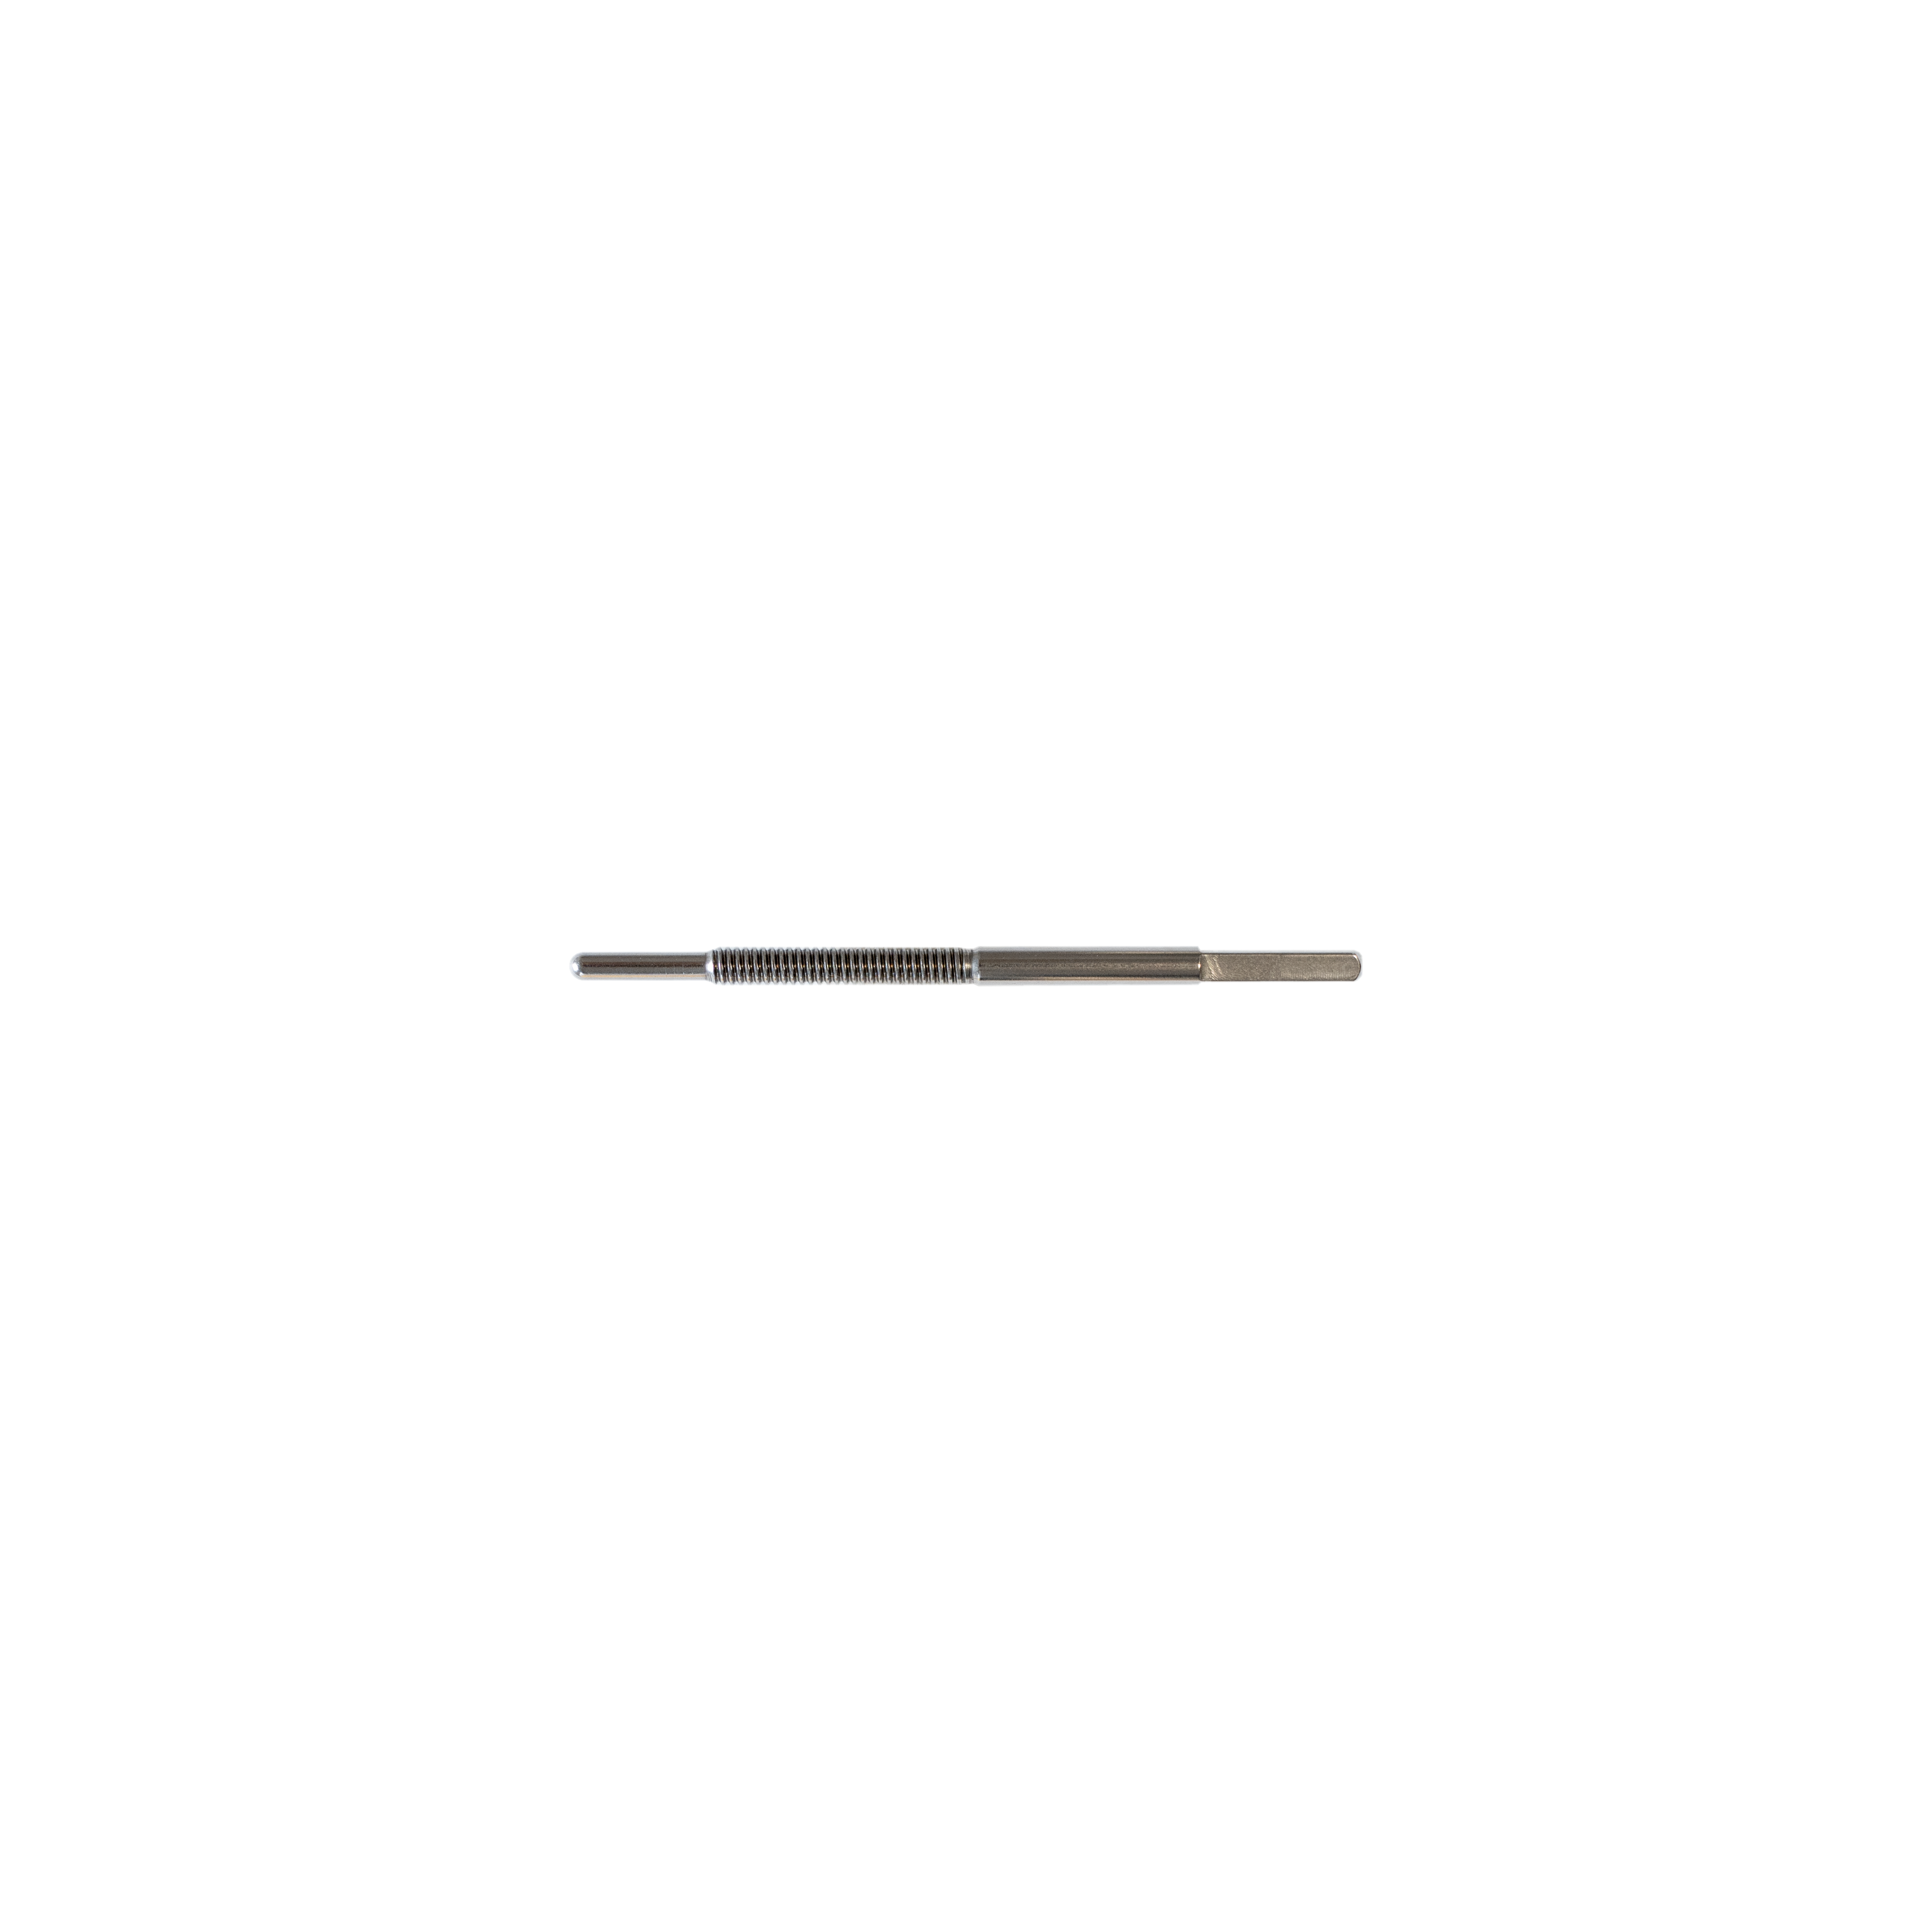 Inch thread 3 mm, Screw, Stainless steel